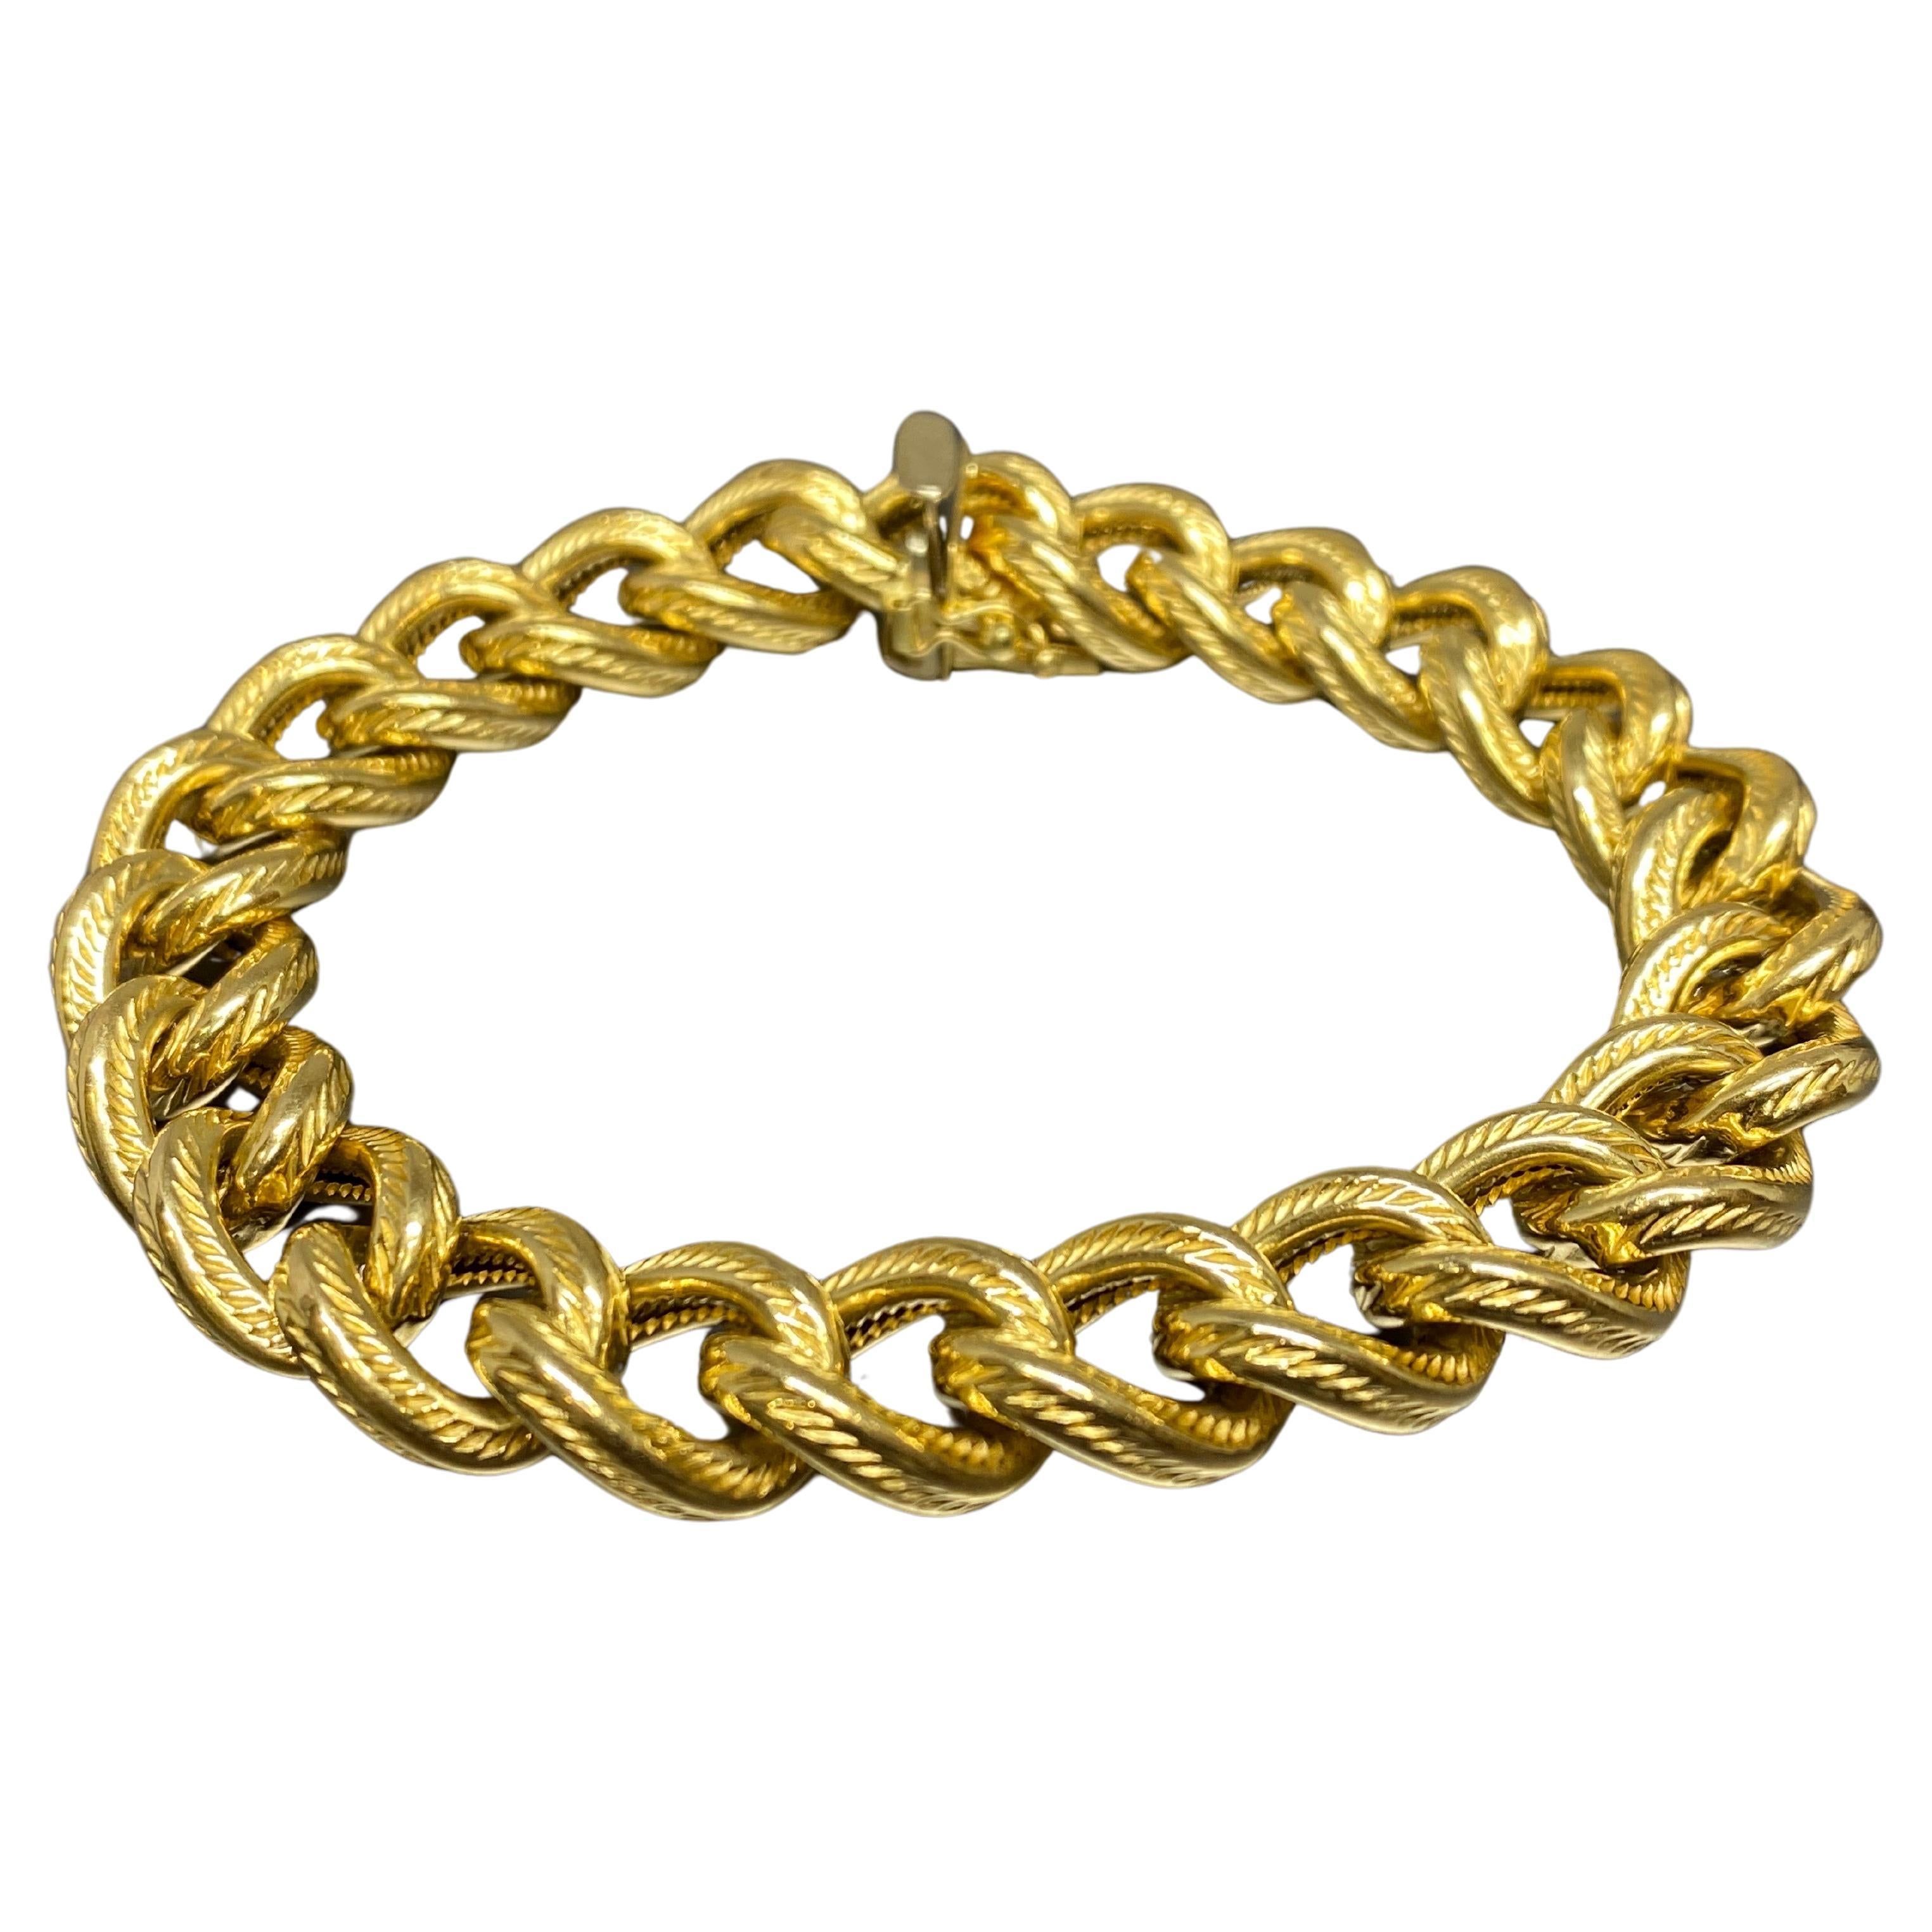 Gorgeous circa 1960's, 70's vintage 18k yellow gold textured curb link bracelet. Never underestimate the value of a good curb link bracelet. They add a dash of sexy, stylish elegance to just about anything you wear. This lustrous beauty has a 